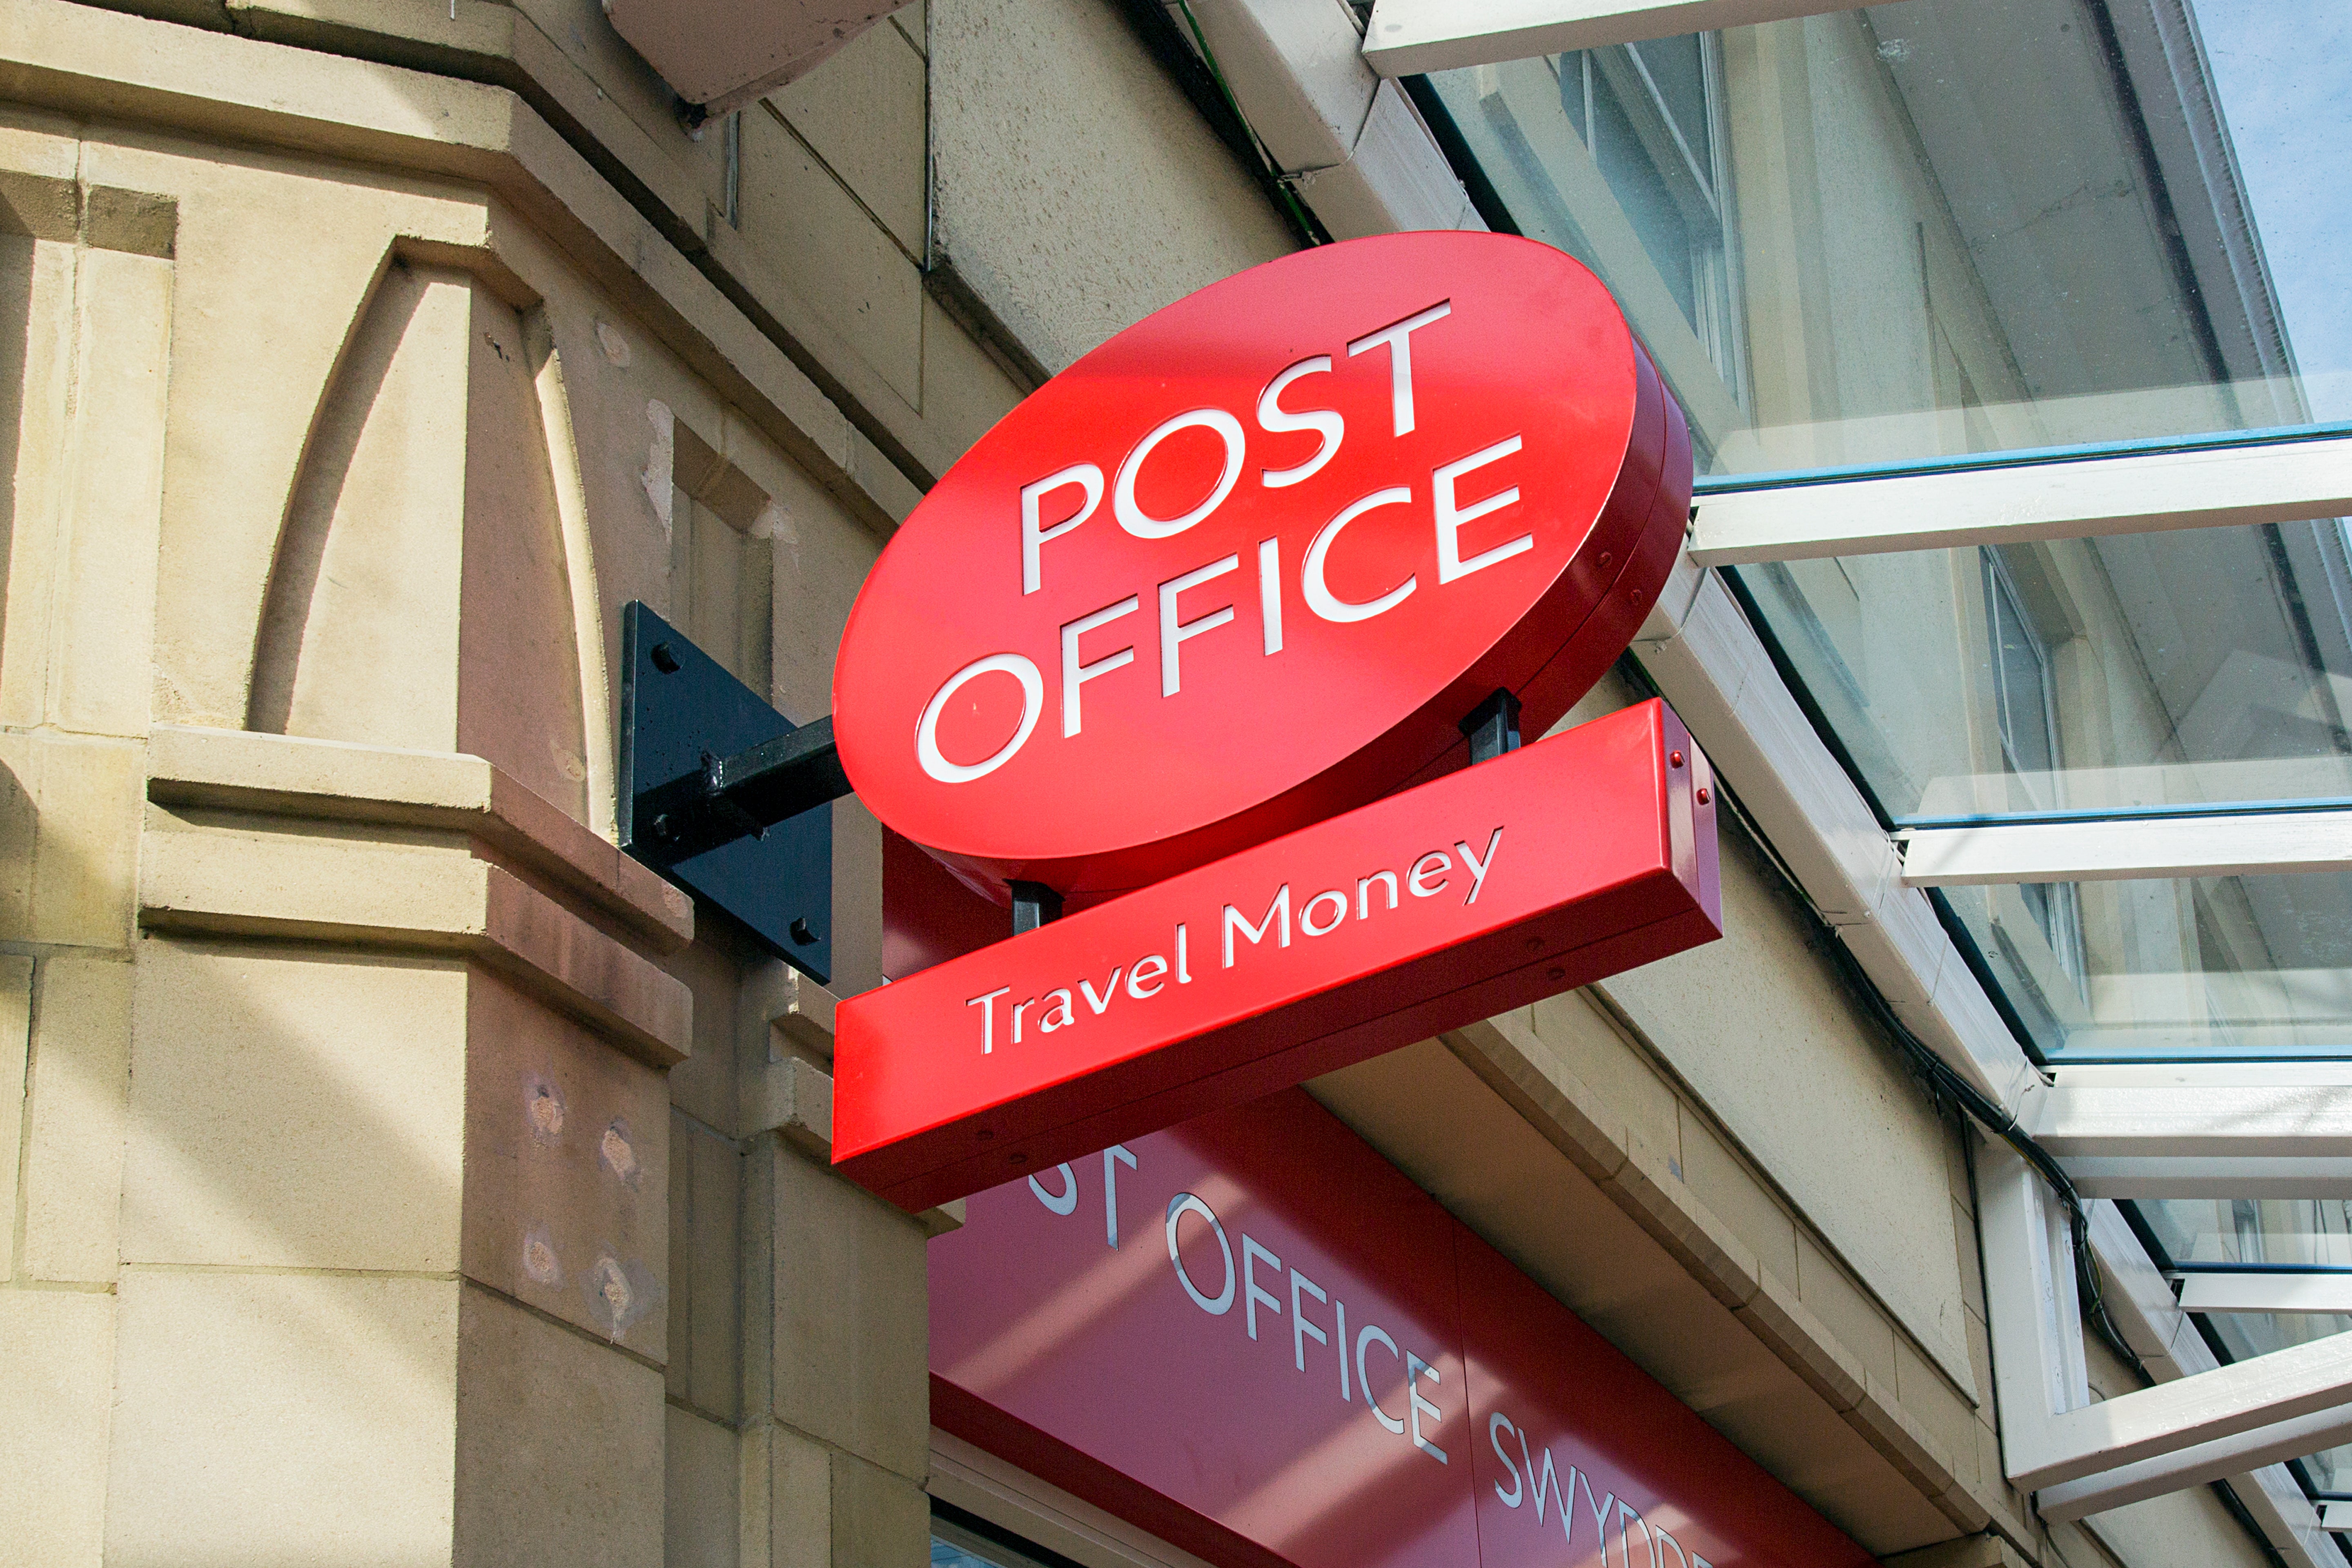 There has been a surge in the number of scammers claiming to be from the Royal Mail